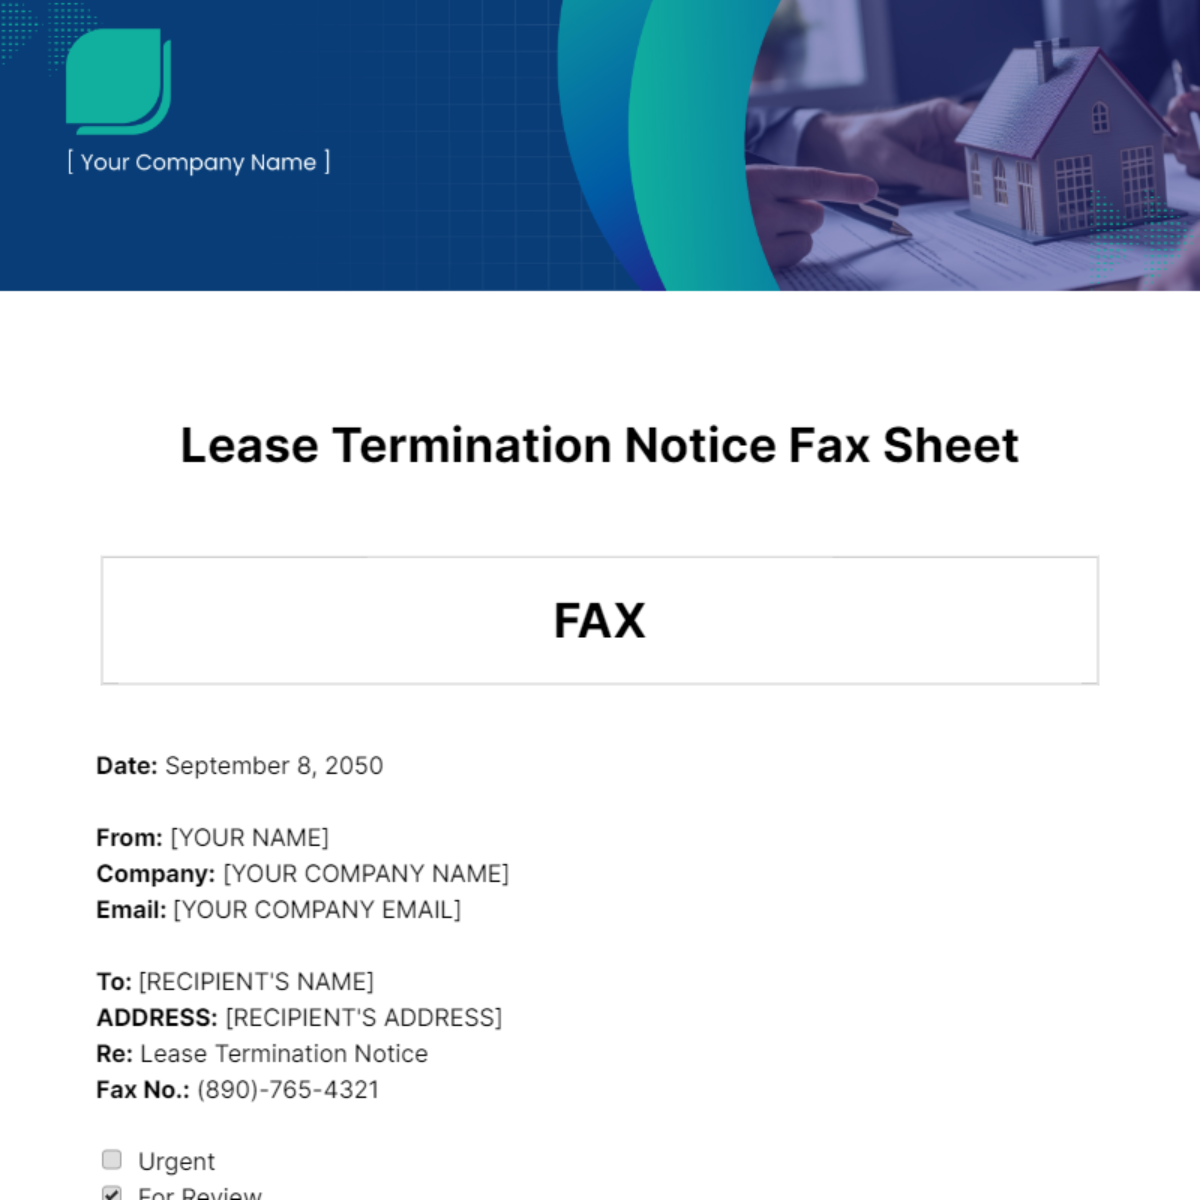 Lease Termination Notice Fax Sheet Template